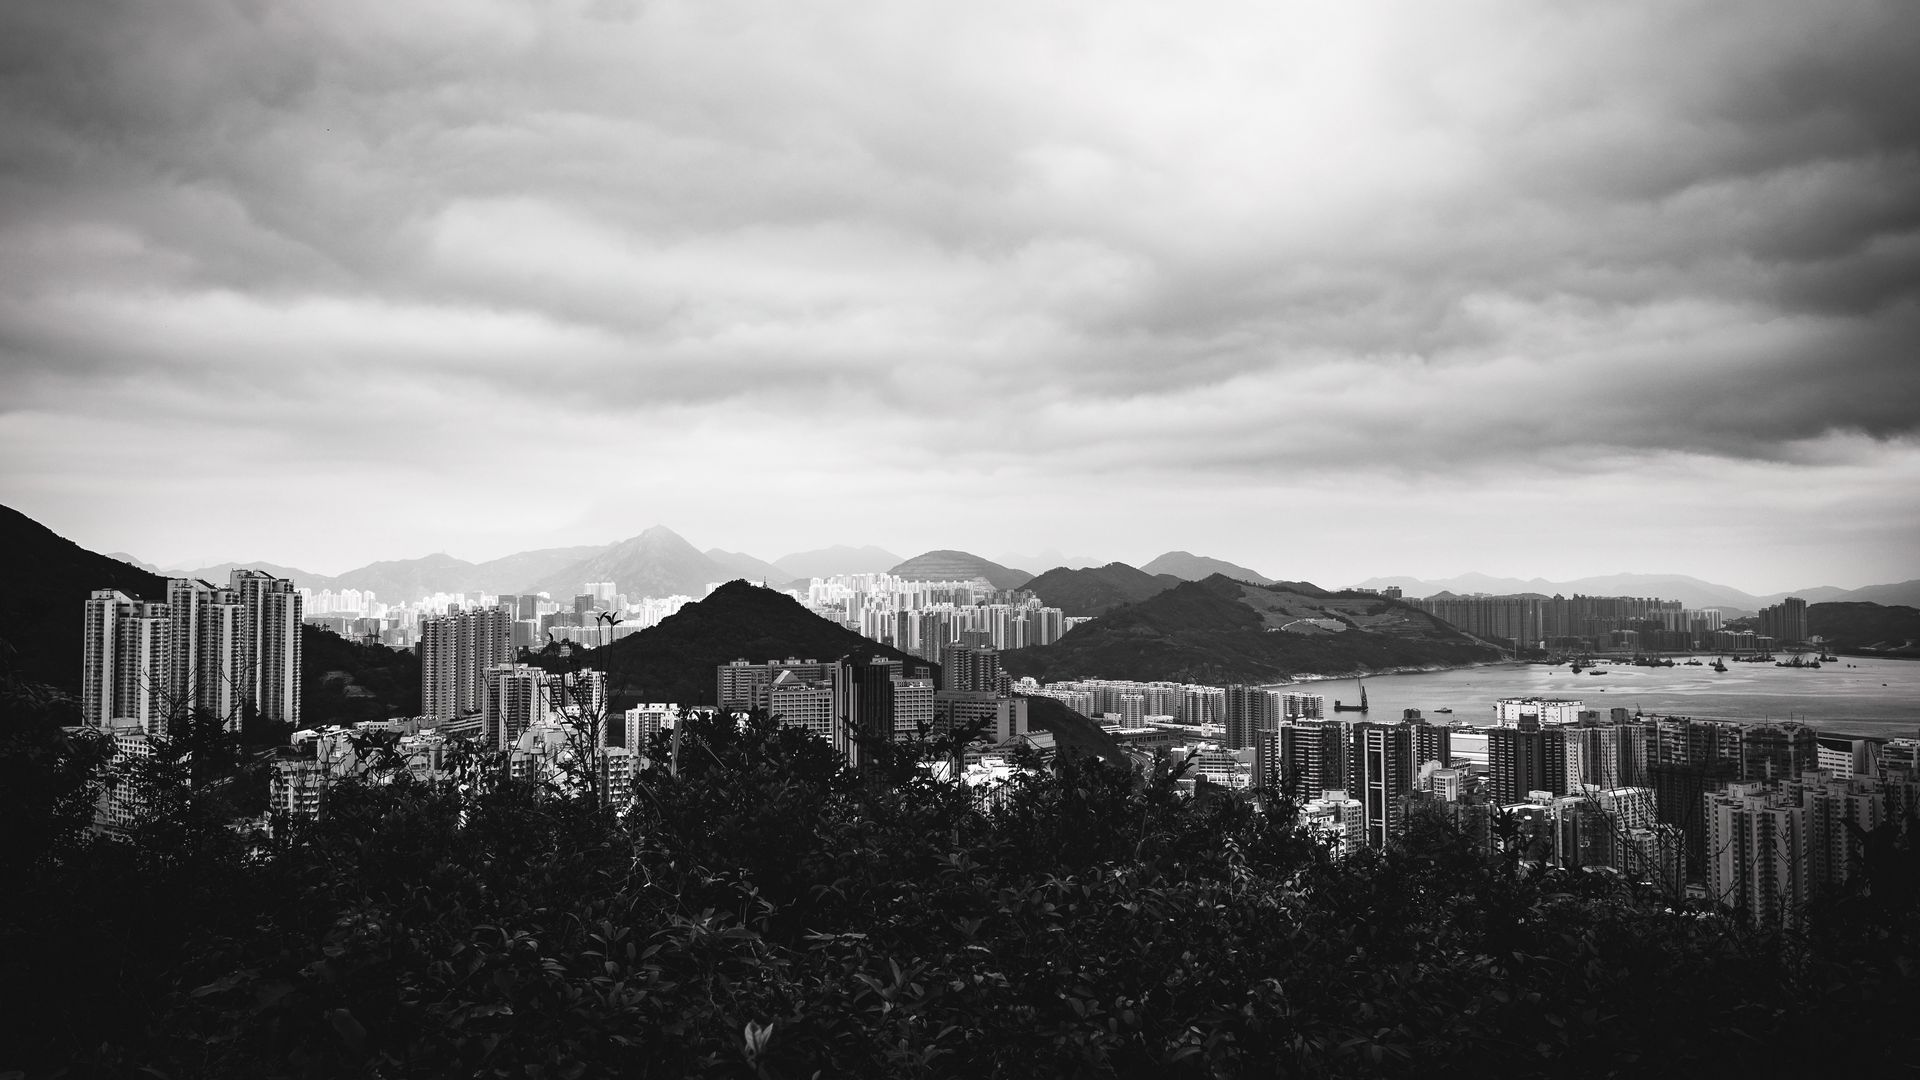 Download wallpaper 1920x1080 buildings, mountains, city, black and ...